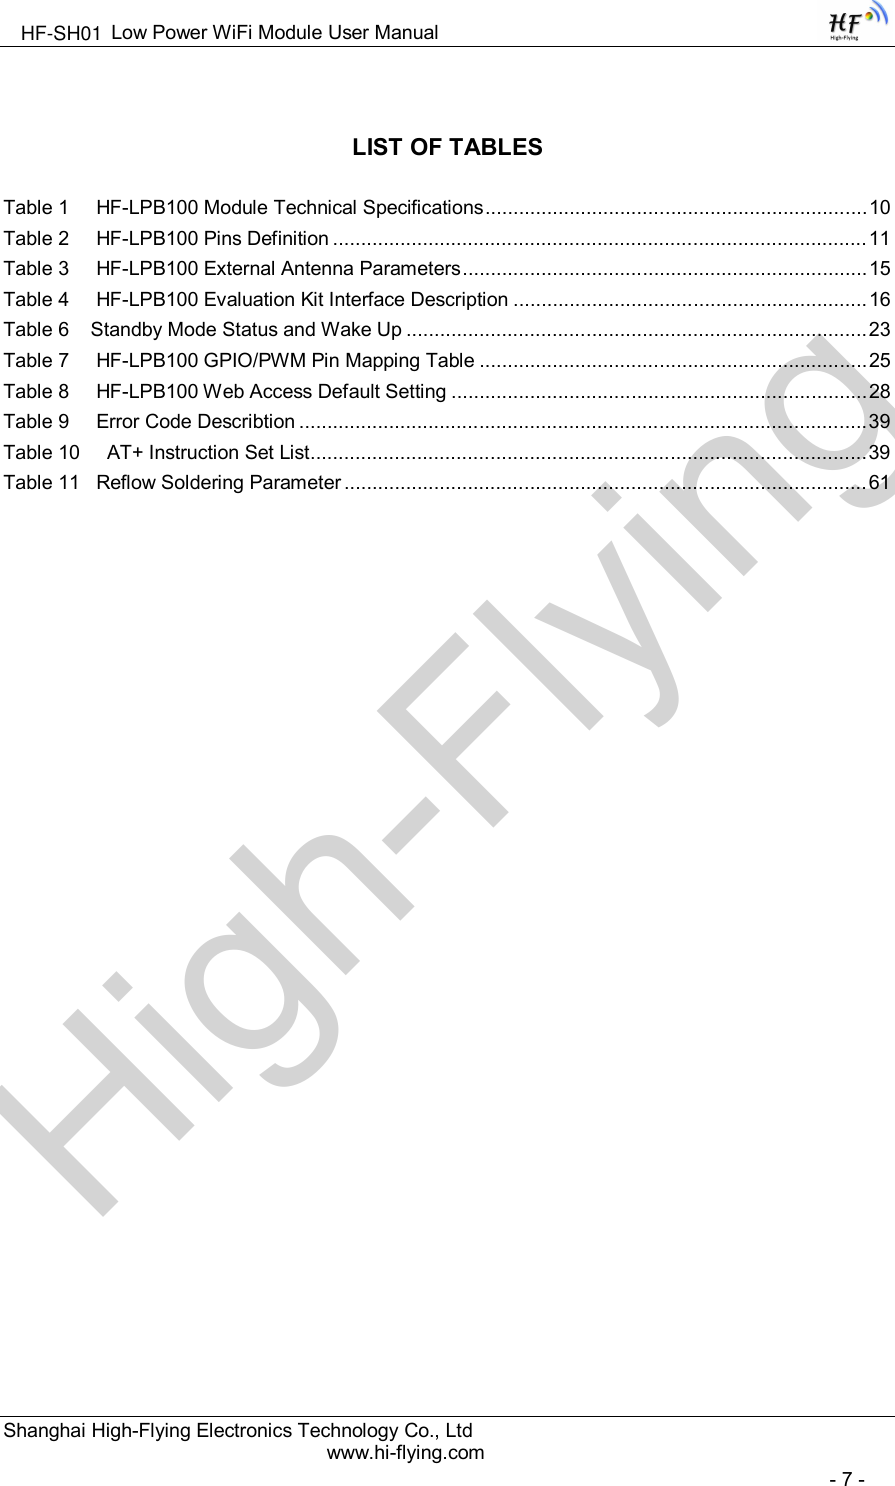 High-FlyingLow Power WiFi Module User ManualShanghai High-Flying Electronics Technology Co., Ltdwww.hi-flying.com- 7 -LIST OF TABLESTable 1 HF-LPB100 Module Technical Specifications....................................................................10Table 2 HF-LPB100 Pins Definition ............................................................................................... 11Table 3 HF-LPB100 External Antenna Parameters........................................................................15Table 4 HF-LPB100 Evaluation Kit Interface Description ............................................................... 16Table 6 Standby Mode Status and Wake Up ..................................................................................23Table 7 HF-LPB100 GPIO/PWM Pin Mapping Table .....................................................................25Table 8 HF-LPB100 Web Access Default Setting ..........................................................................28Table 9 Error Code Describtion .....................................................................................................39Table 10 AT+ Instruction Set List...................................................................................................39Table 11 Reflow Soldering Parameter .............................................................................................61HF-SH01